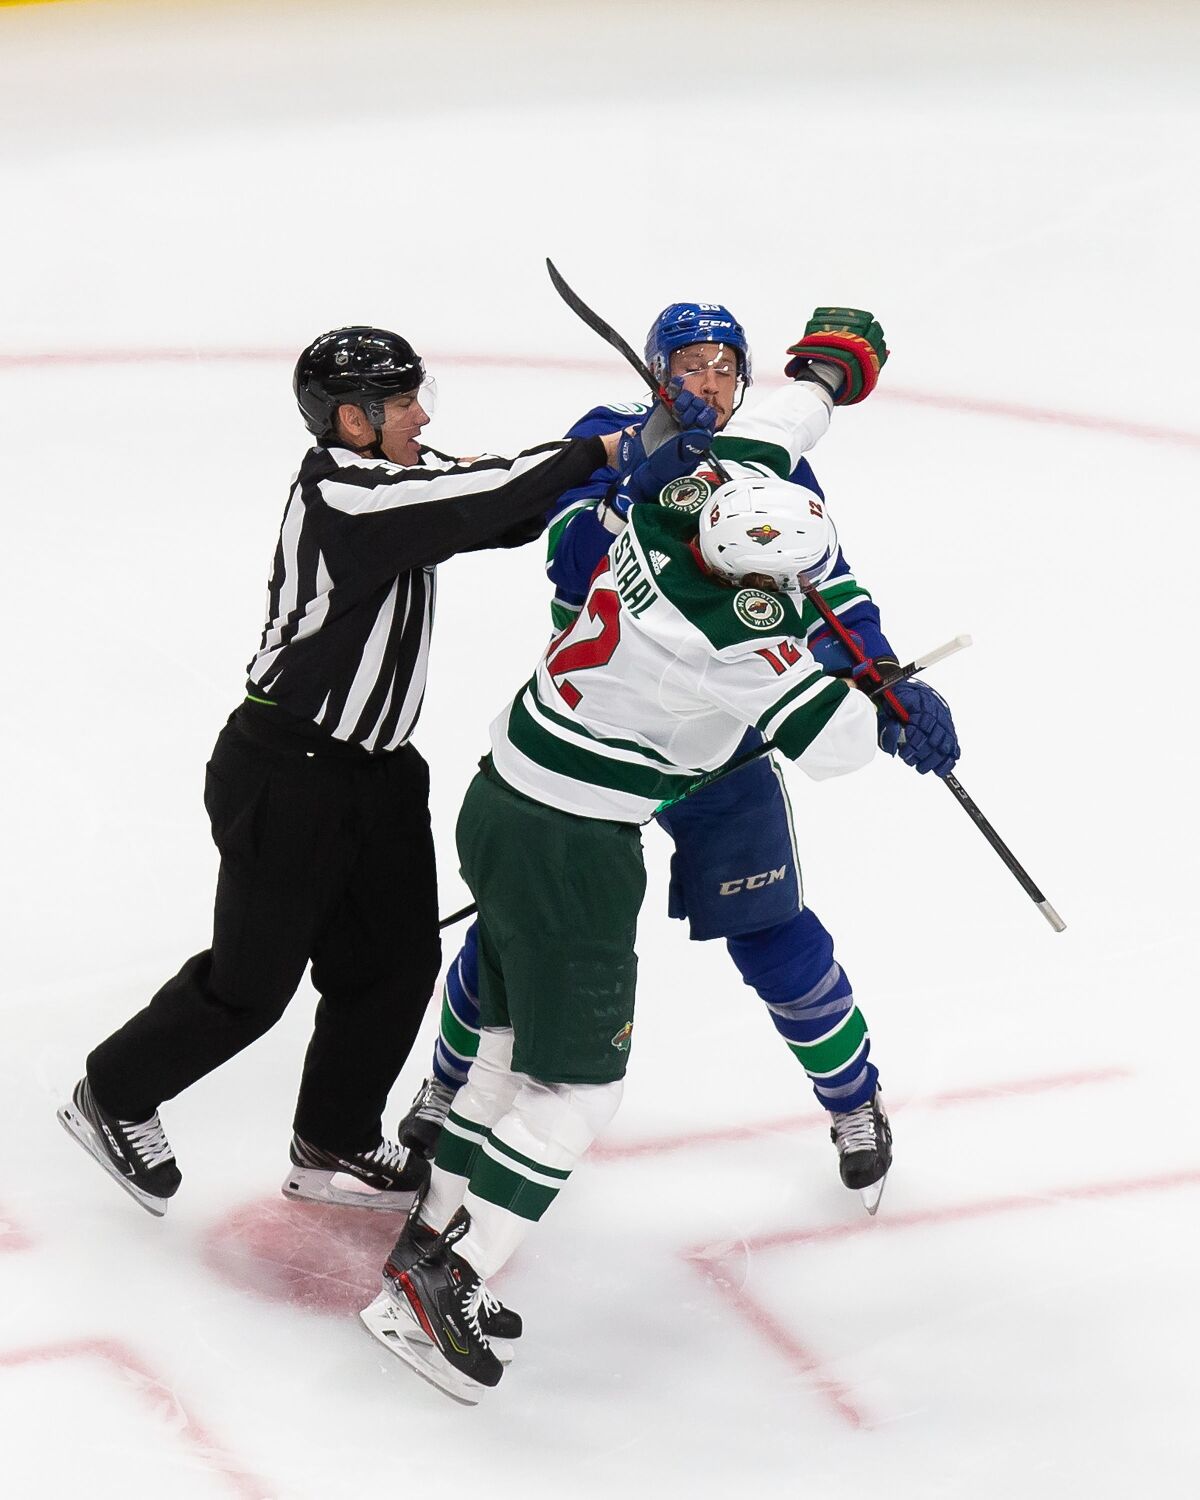 Minnesota Wild's Eric Staal (12) battles against Vancouver Canucks' Jay Beagle (83) during the first period of an NHL hockey playoff game Tuesday, Aug. 4, 2020 in Edmonton, Alberta. (Codie McLachlan/The Canadian Press via AP)